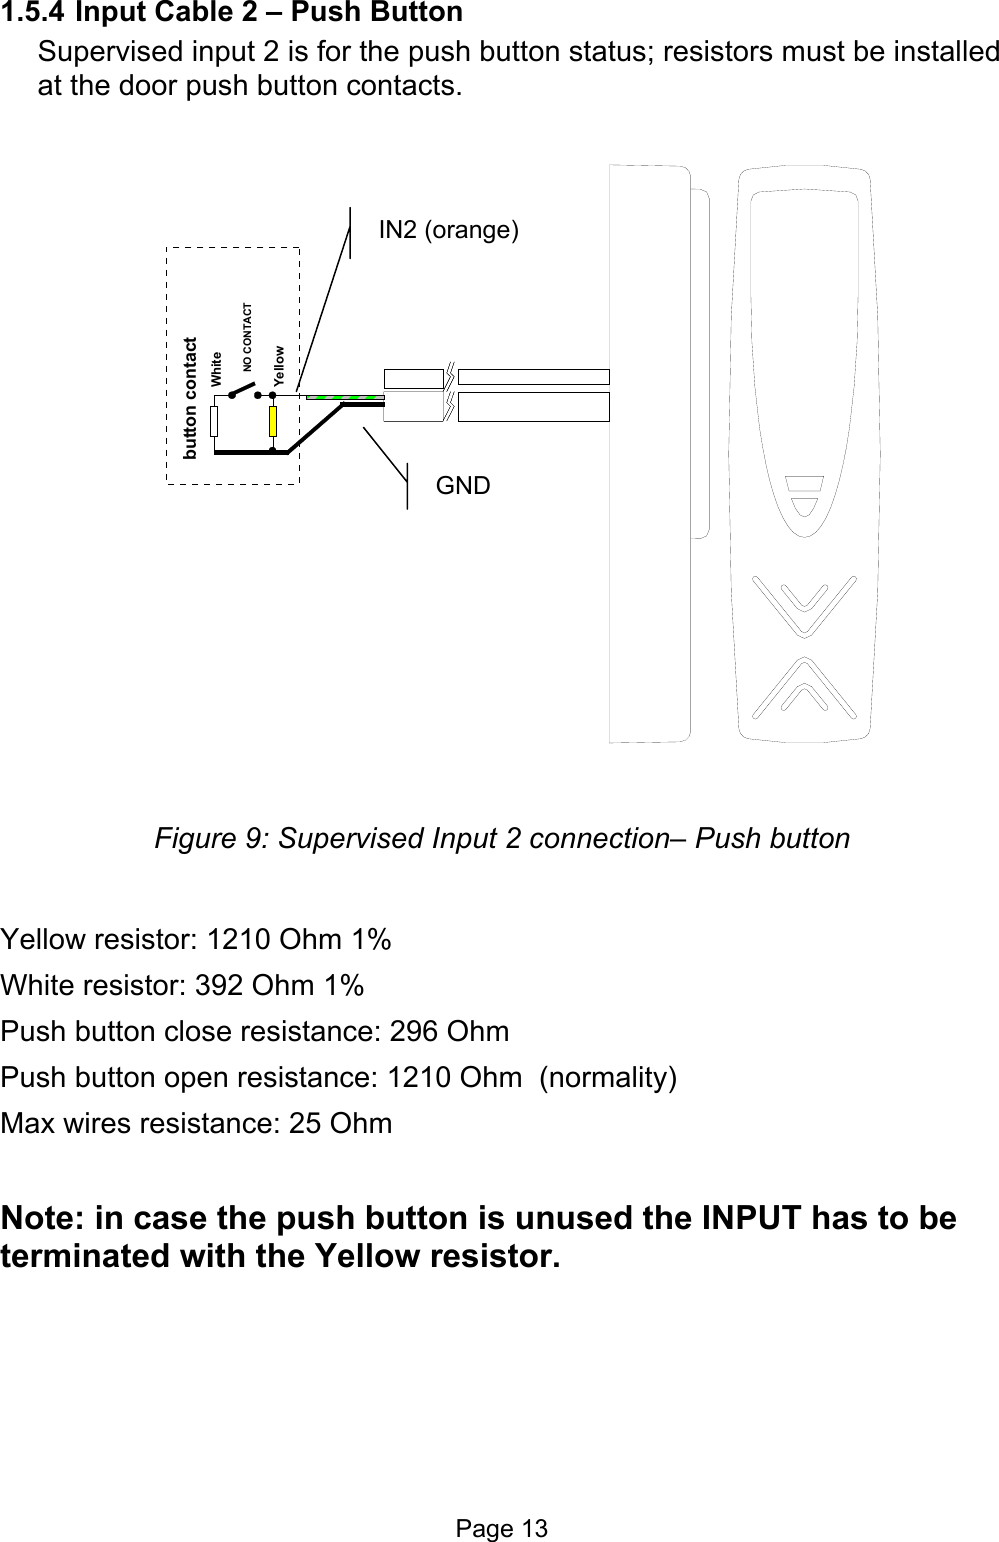  1.5.4 Input Cable 2 – Push Button Supervised input 2 is for the push button status; resistors must be installed at the door push button contacts. WhiteYellowbutton contactNO CONTACT  IN2 (orange) GND Figure 9: Supervised Input 2 connection– Push button  Yellow resistor: 1210 Ohm 1% White resistor: 392 Ohm 1% Push button close resistance: 296 Ohm Push button open resistance: 1210 Ohm  (normality) Max wires resistance: 25 Ohm   Note: in case the push button is unused the INPUT has to be terminated with the Yellow resistor.  Page 13 